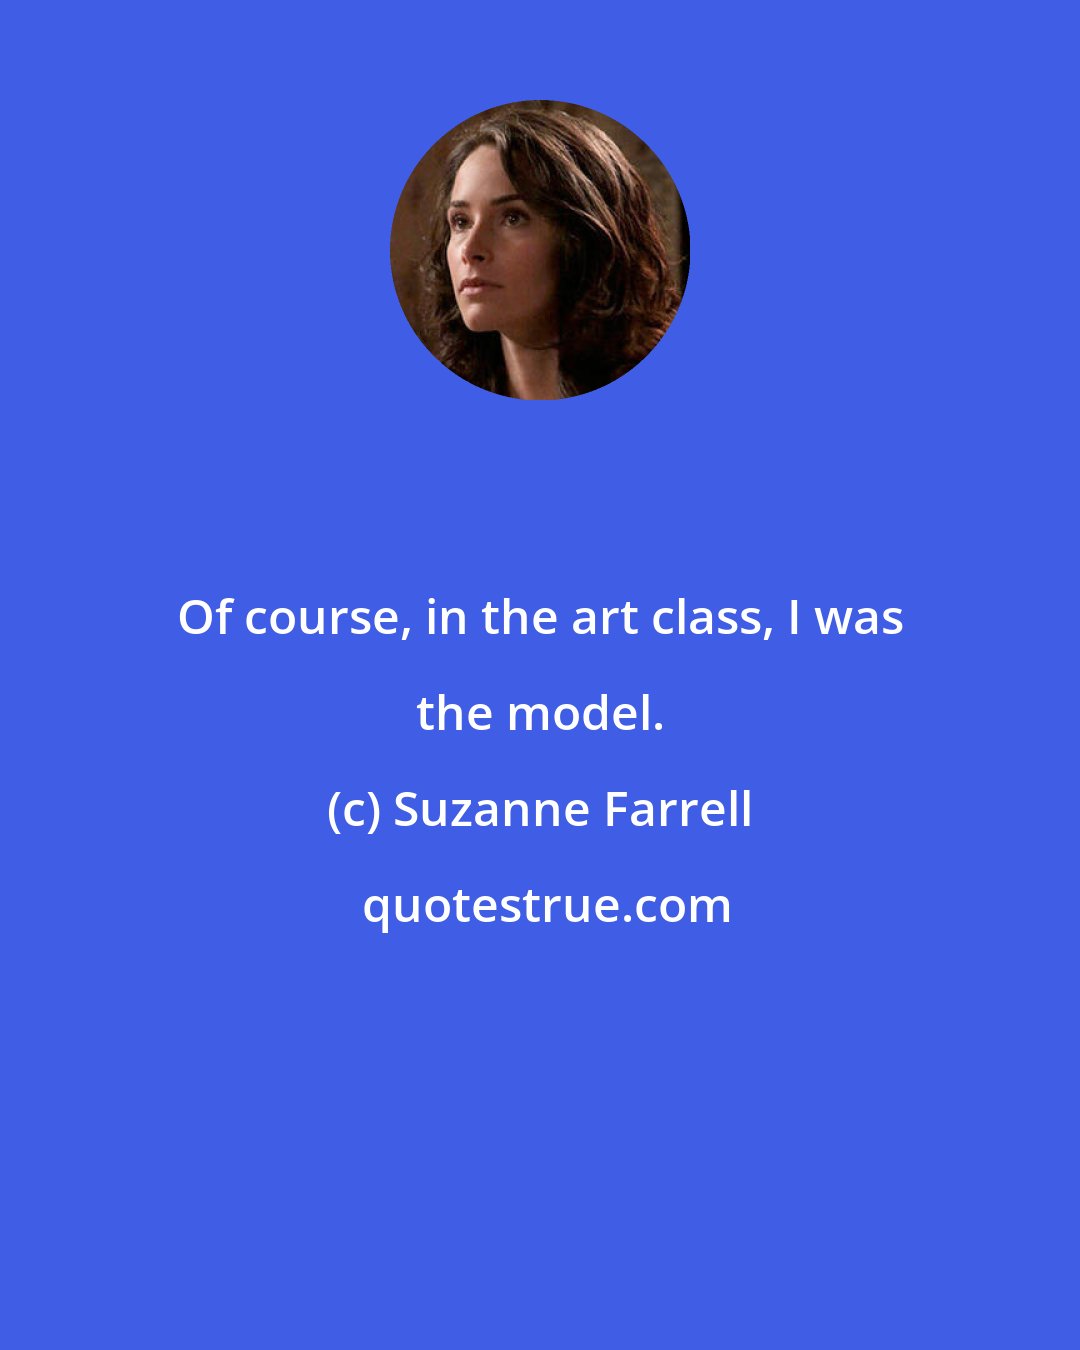 Suzanne Farrell: Of course, in the art class, I was the model.